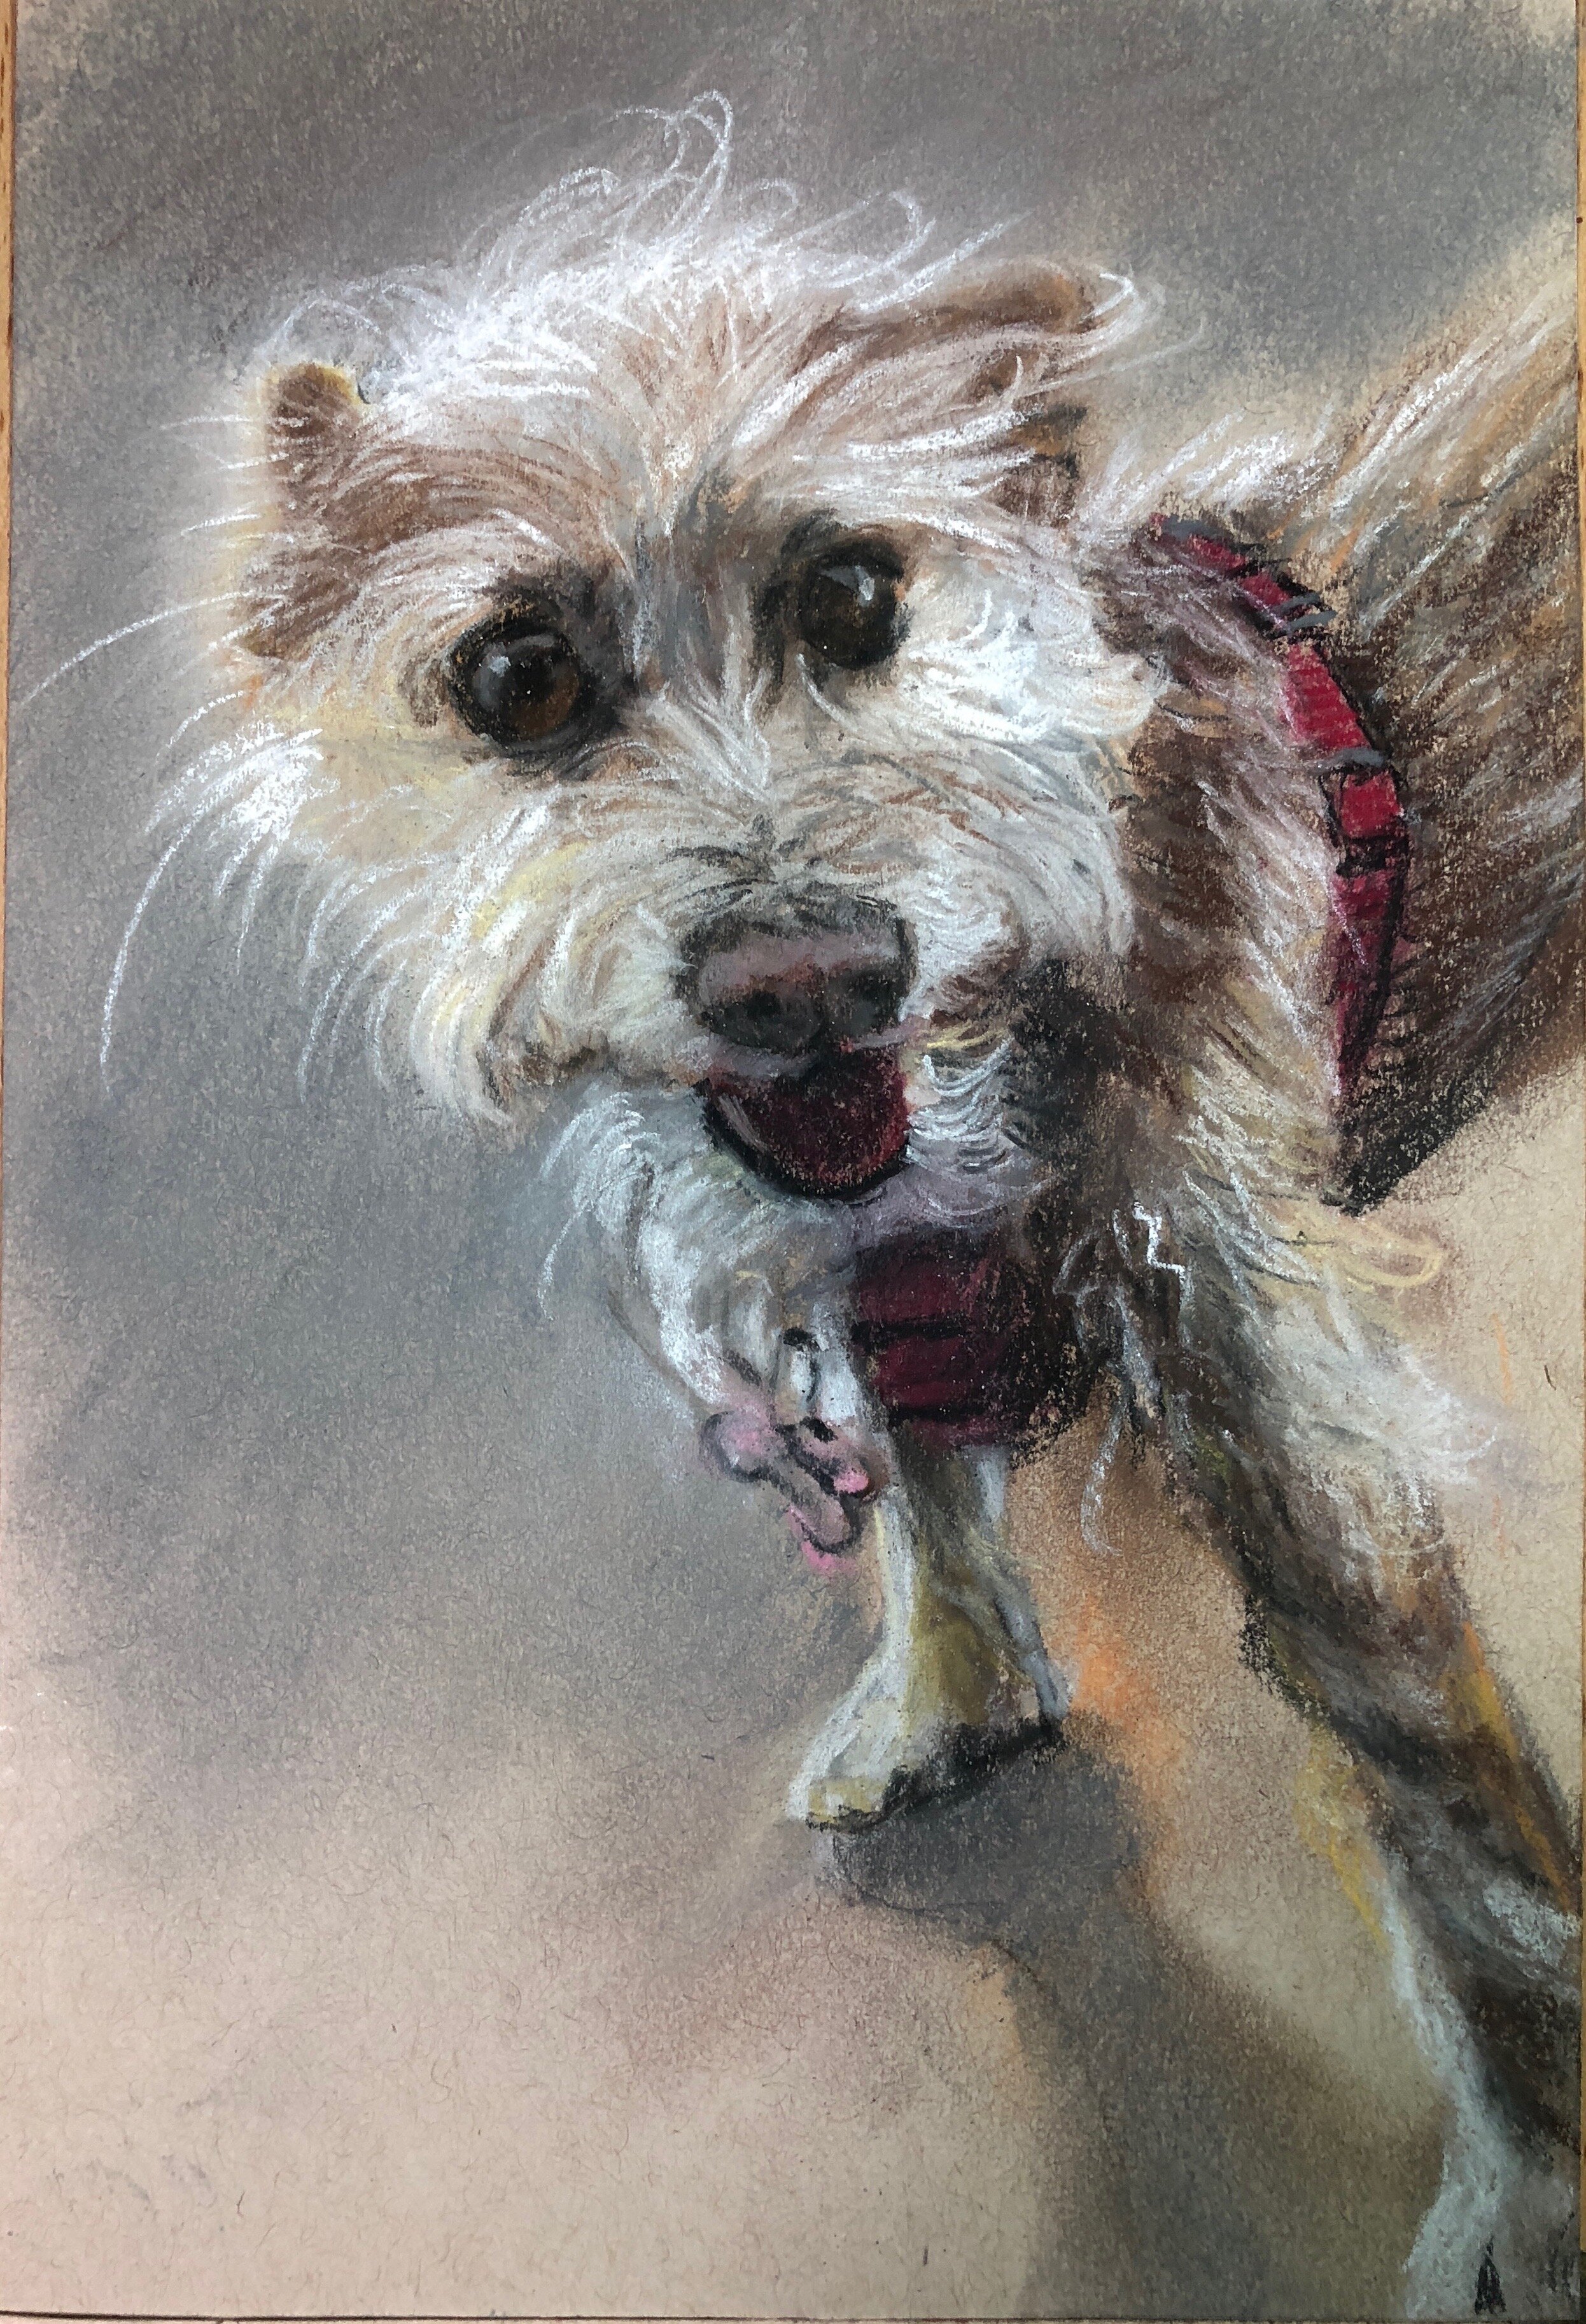   Max  Watercolor and chalk pastel on paper 8x6 inches 